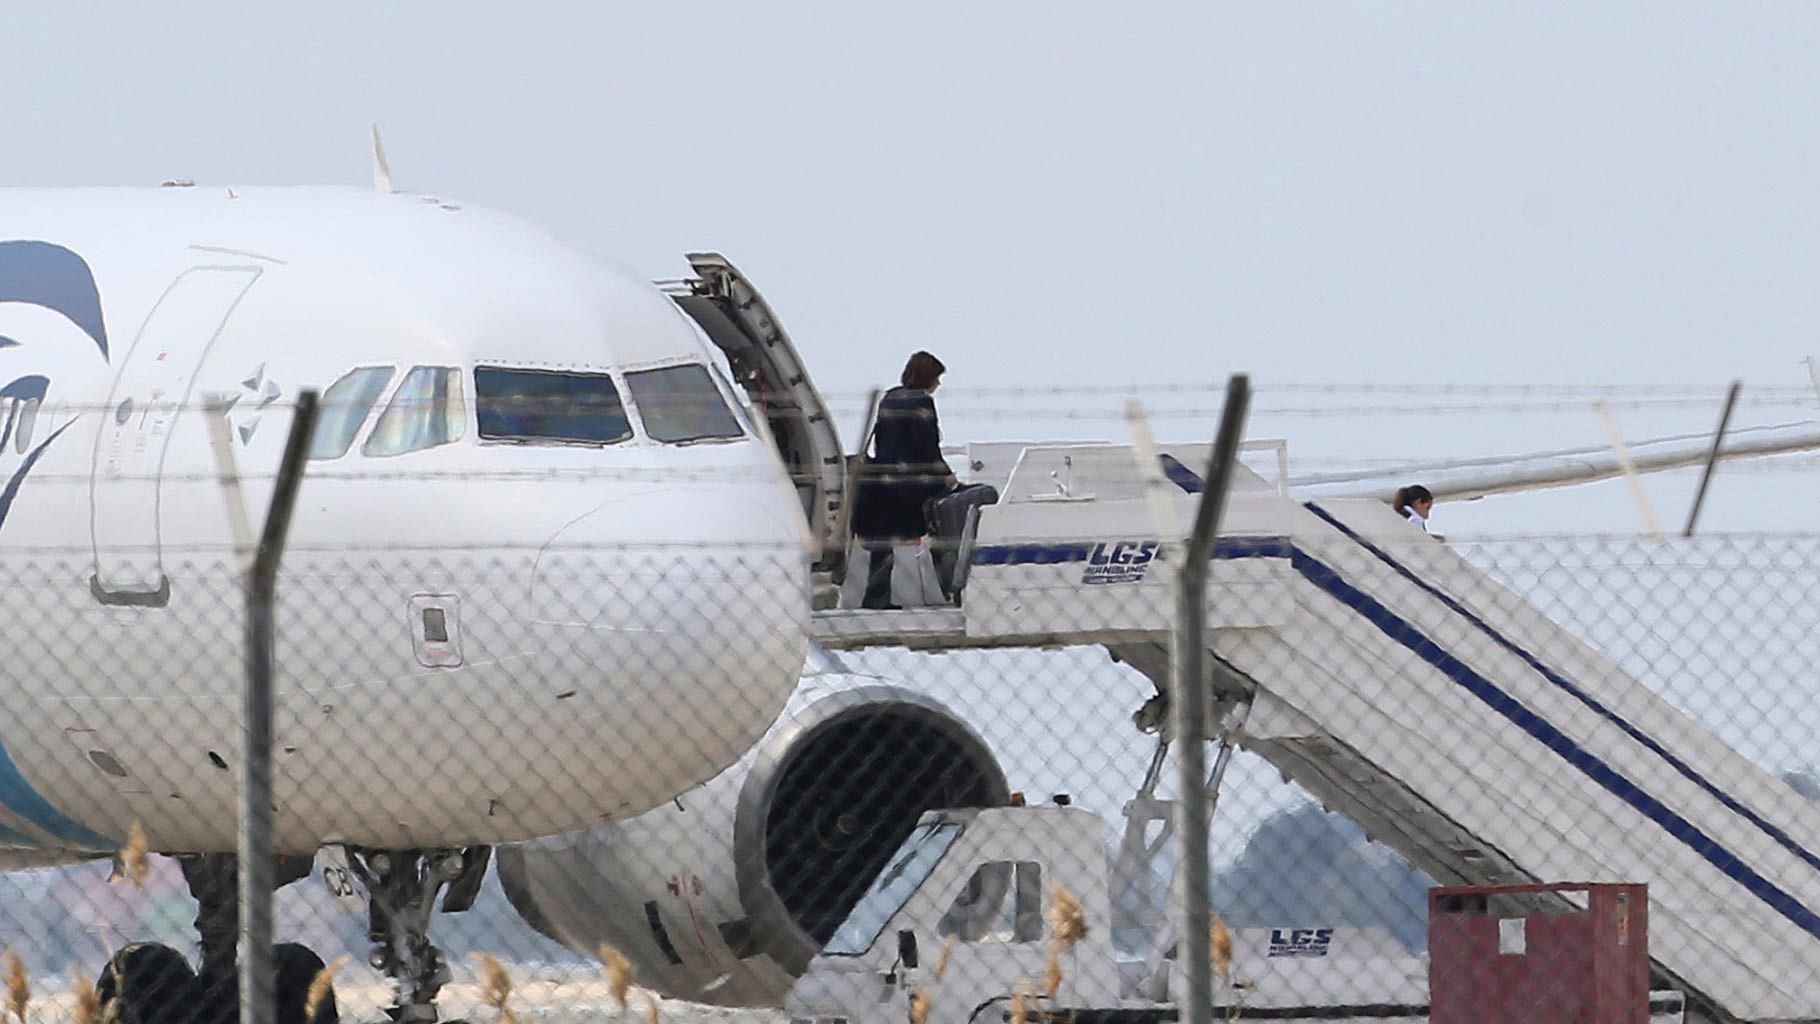 A passenger leaves the hijacked EgyptAir aircraft after landing at Larnaca Airport in Cyprus. (Photo: AP)